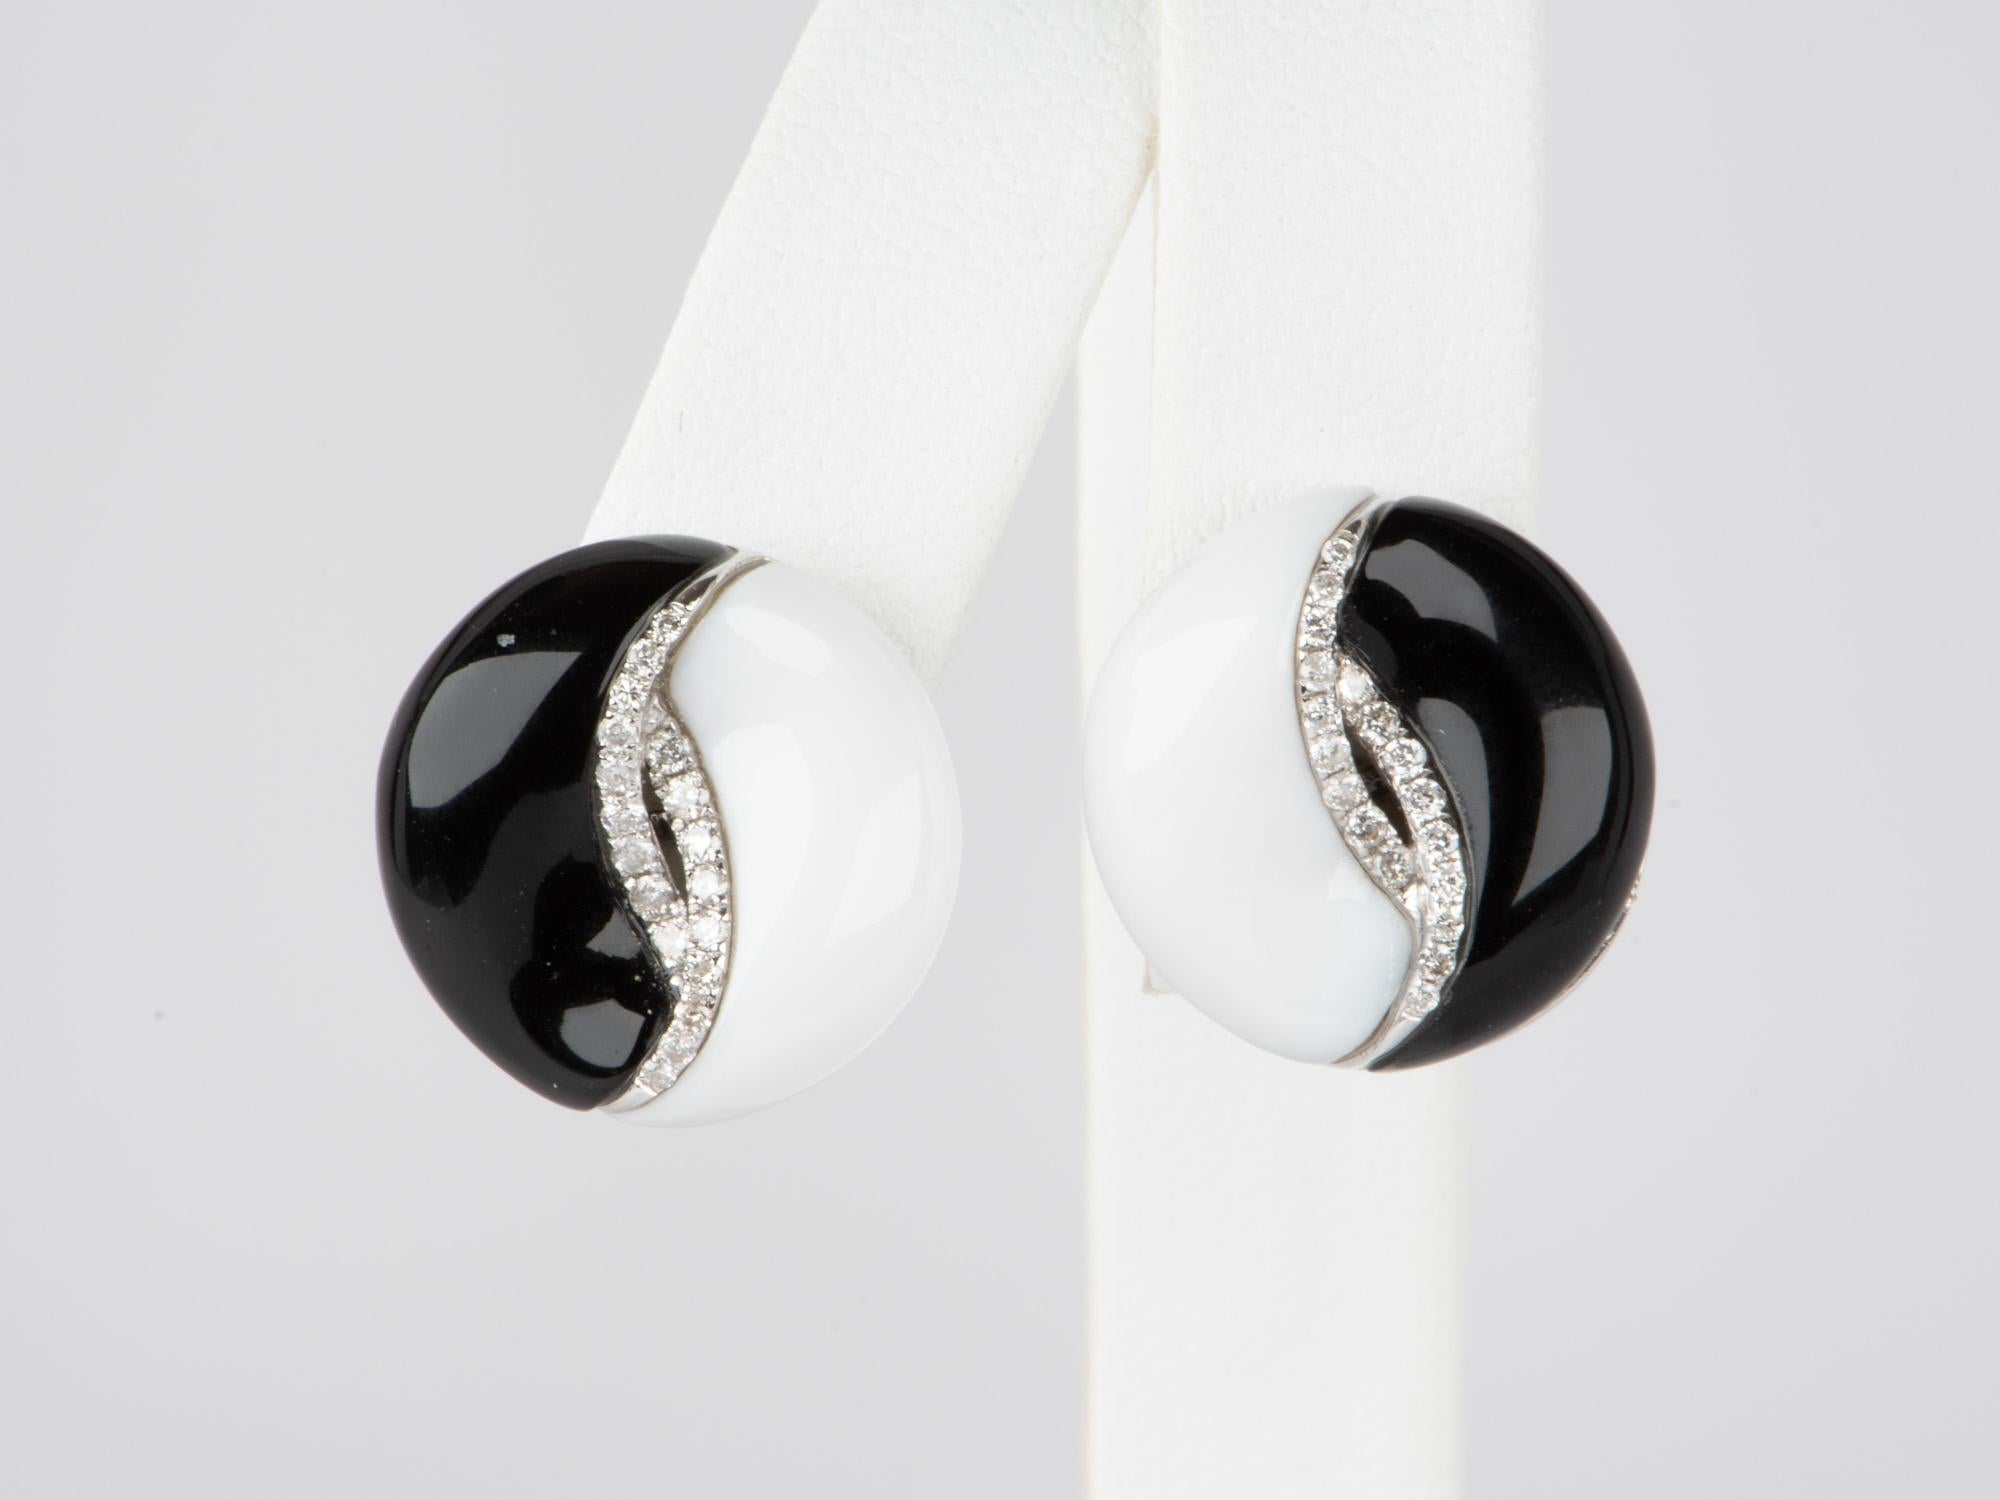 ♥ 14K White Gold Black and White Onyx Earrings with Diamond
♥ Each earring measures about 17mm in size

♥ Material: 14K Gold
♥ Gemstone: Onyx; Diamond, 0.25ct